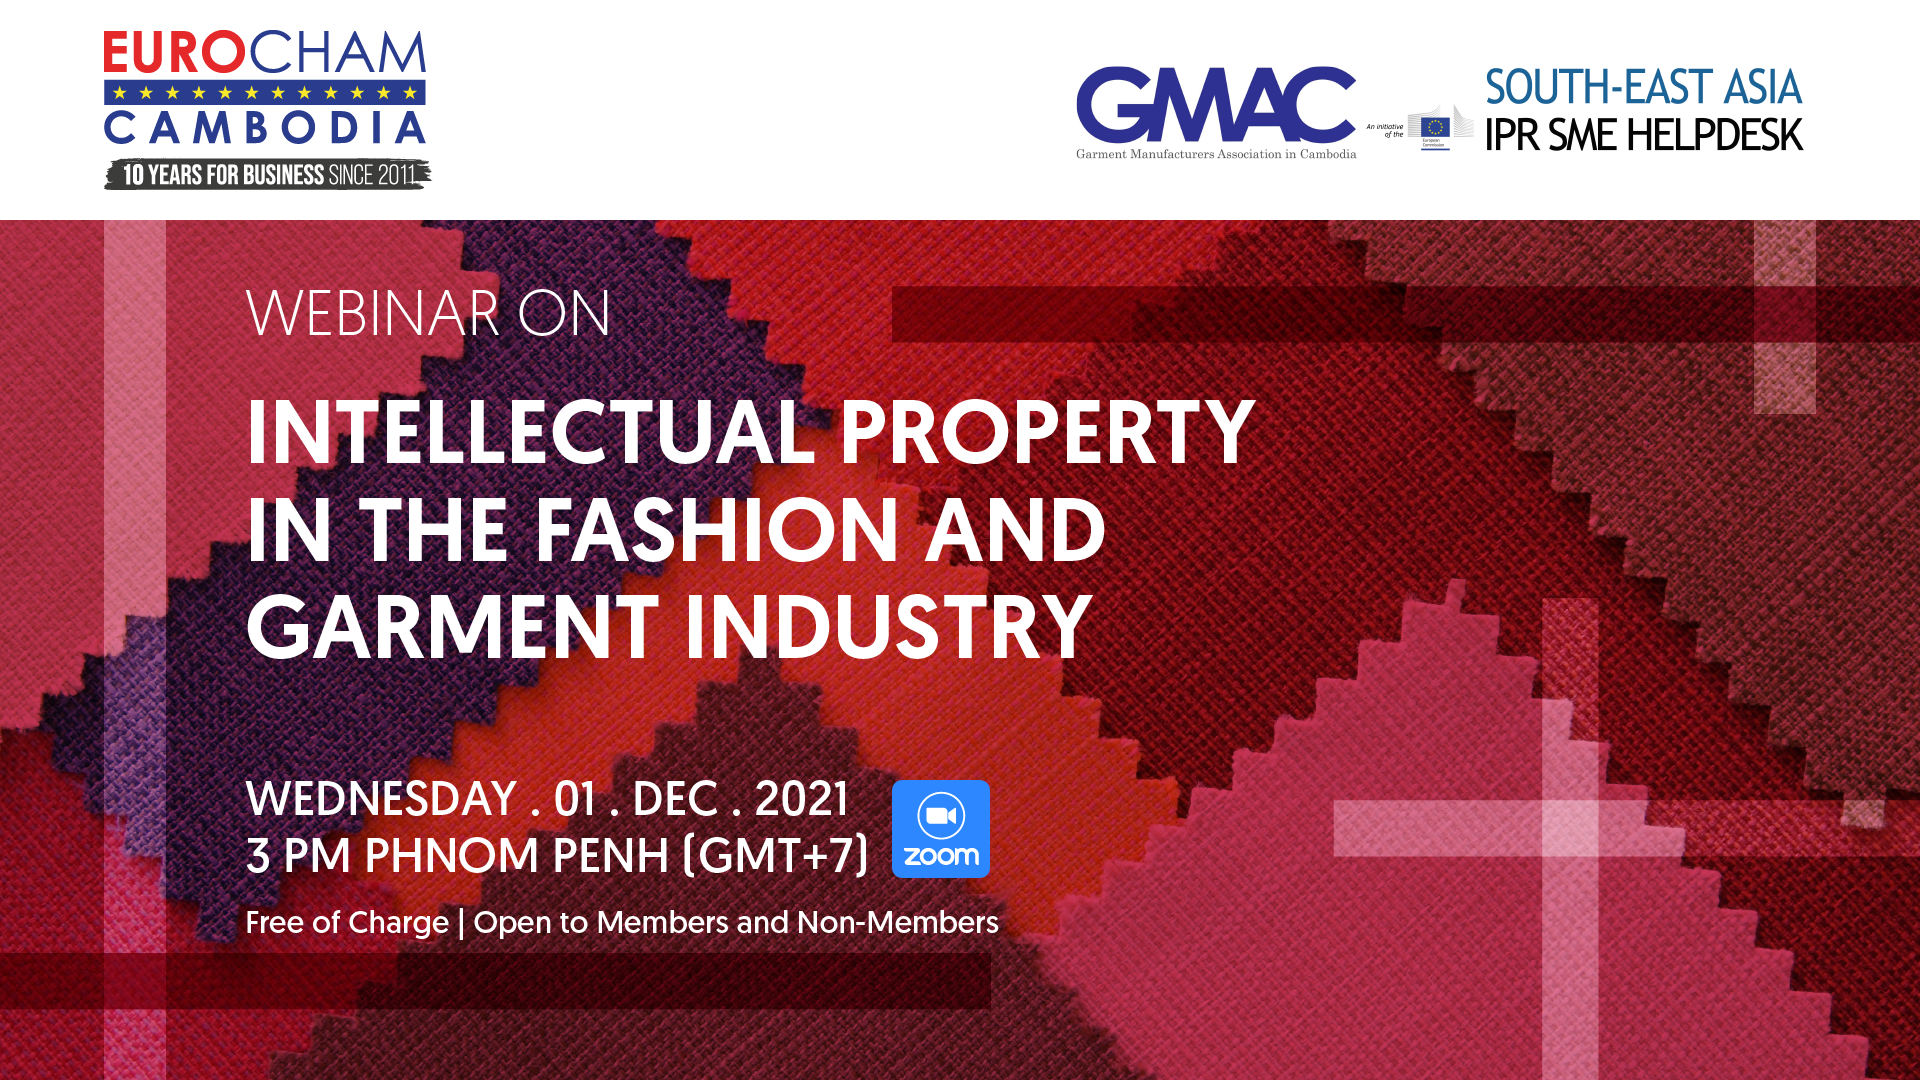 Webinar on Intellectual Property in the Fashion and Garment Industry_ 1 Dec 2021